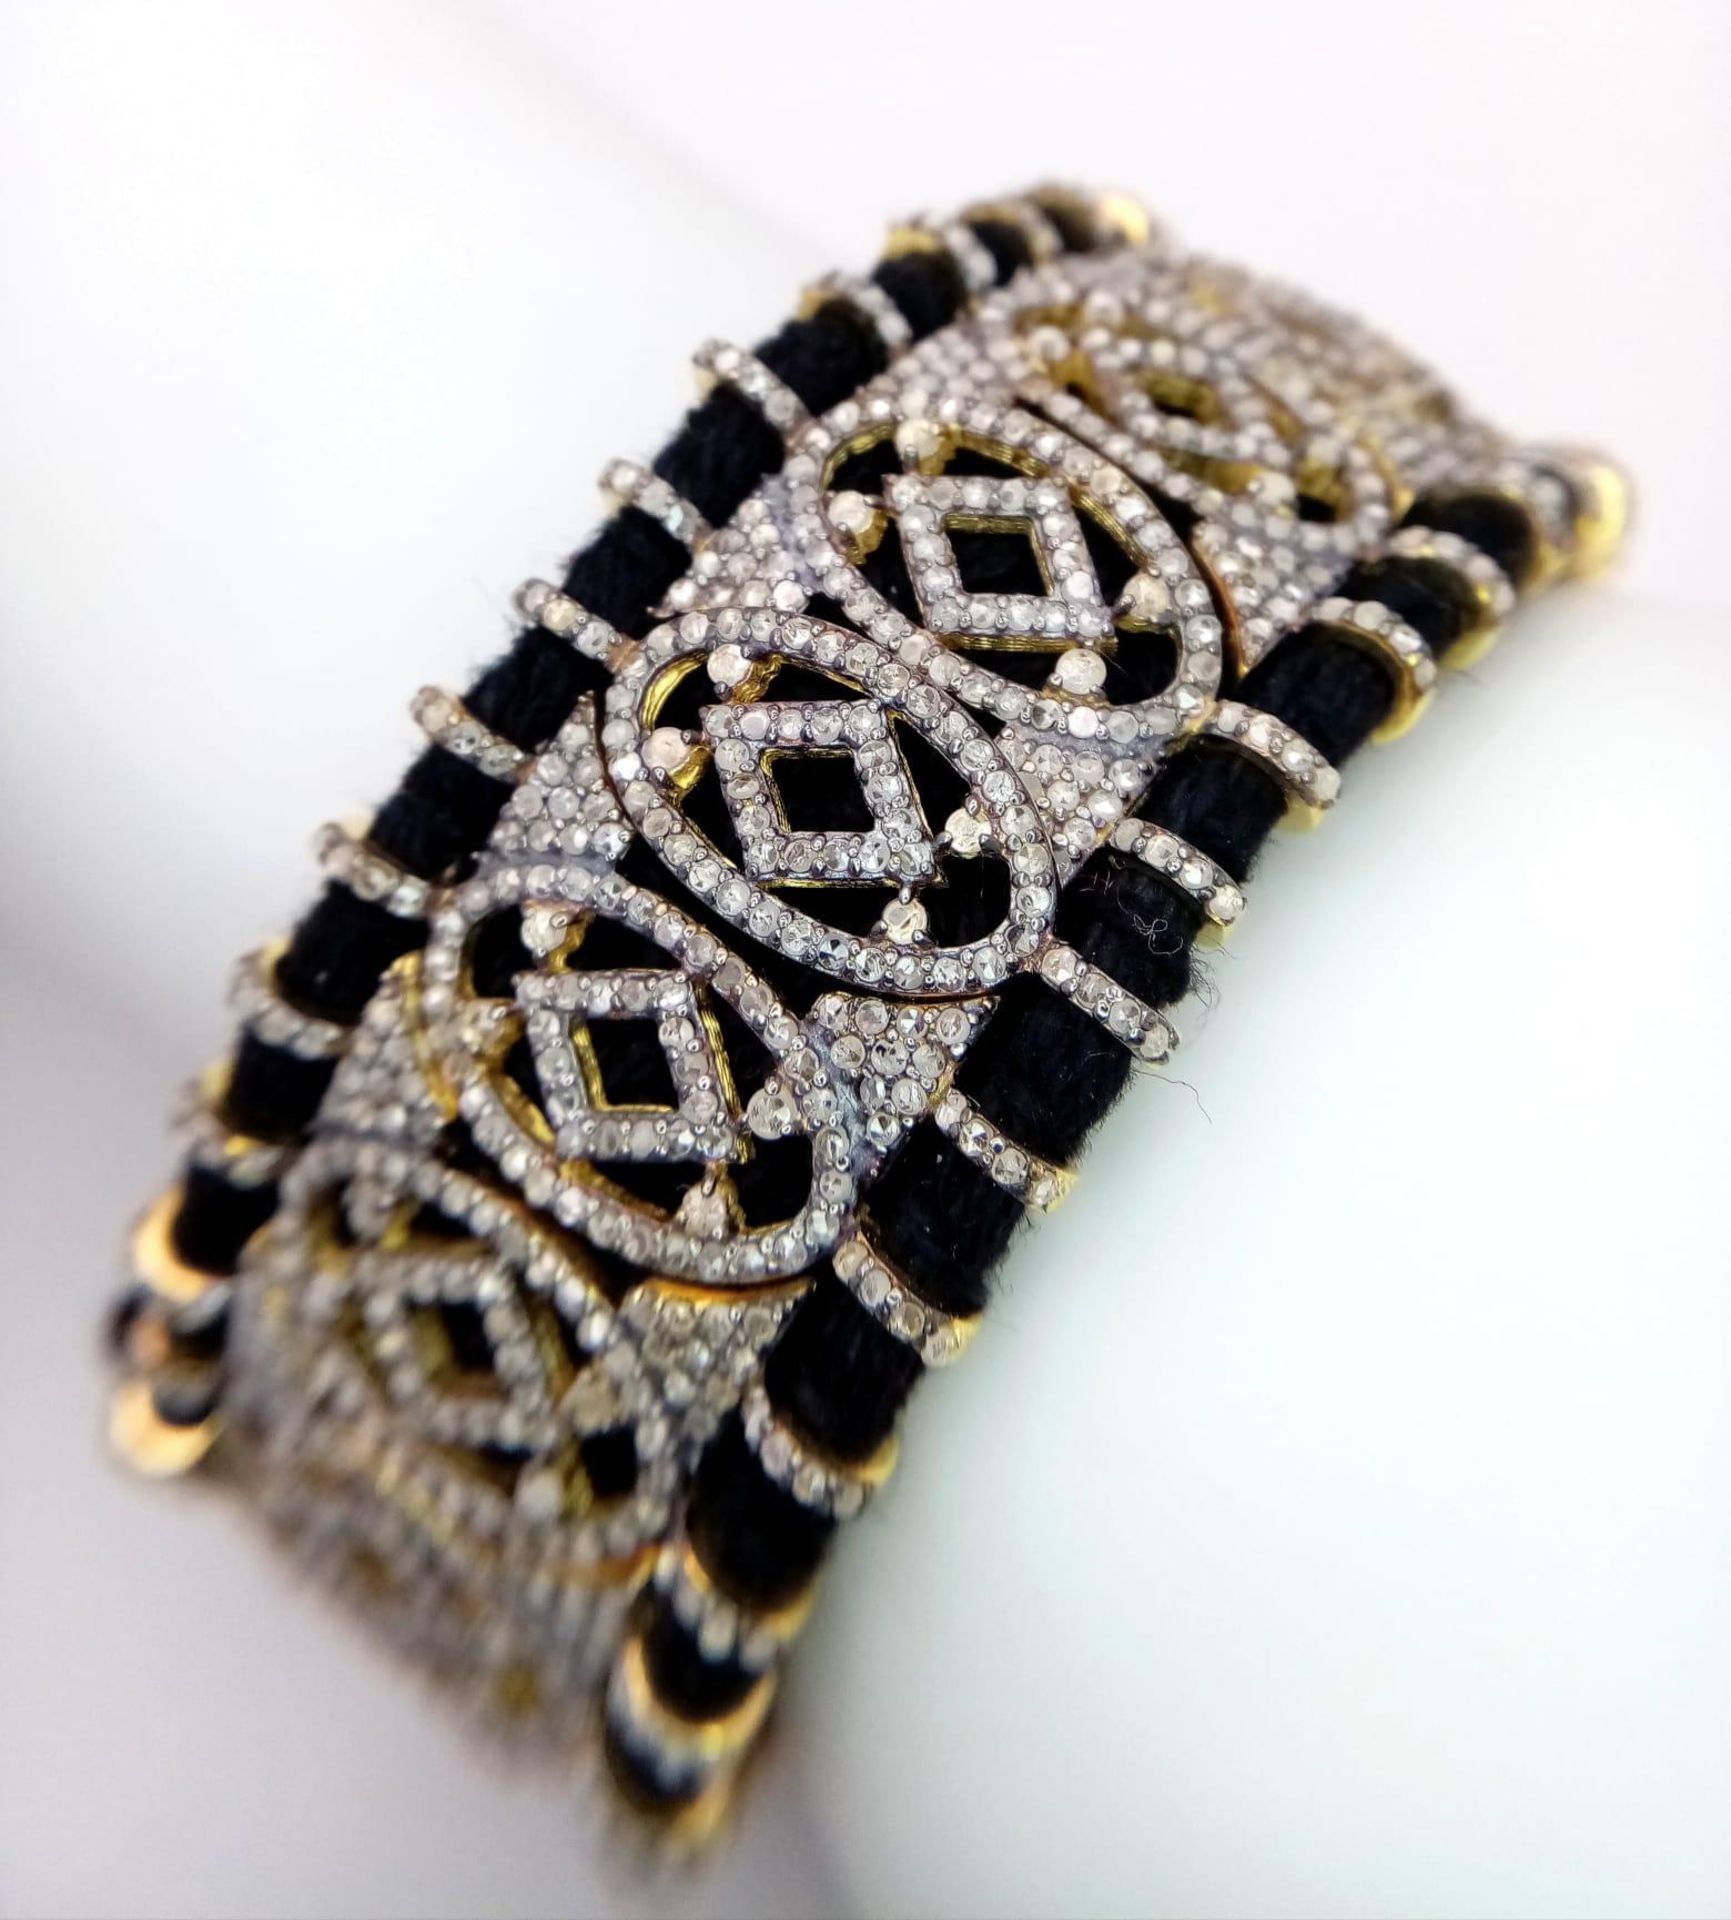 A Diamond Tennis Bracelet with 10ctw (approx) of round cut diamonds set in 925 Silver on a black